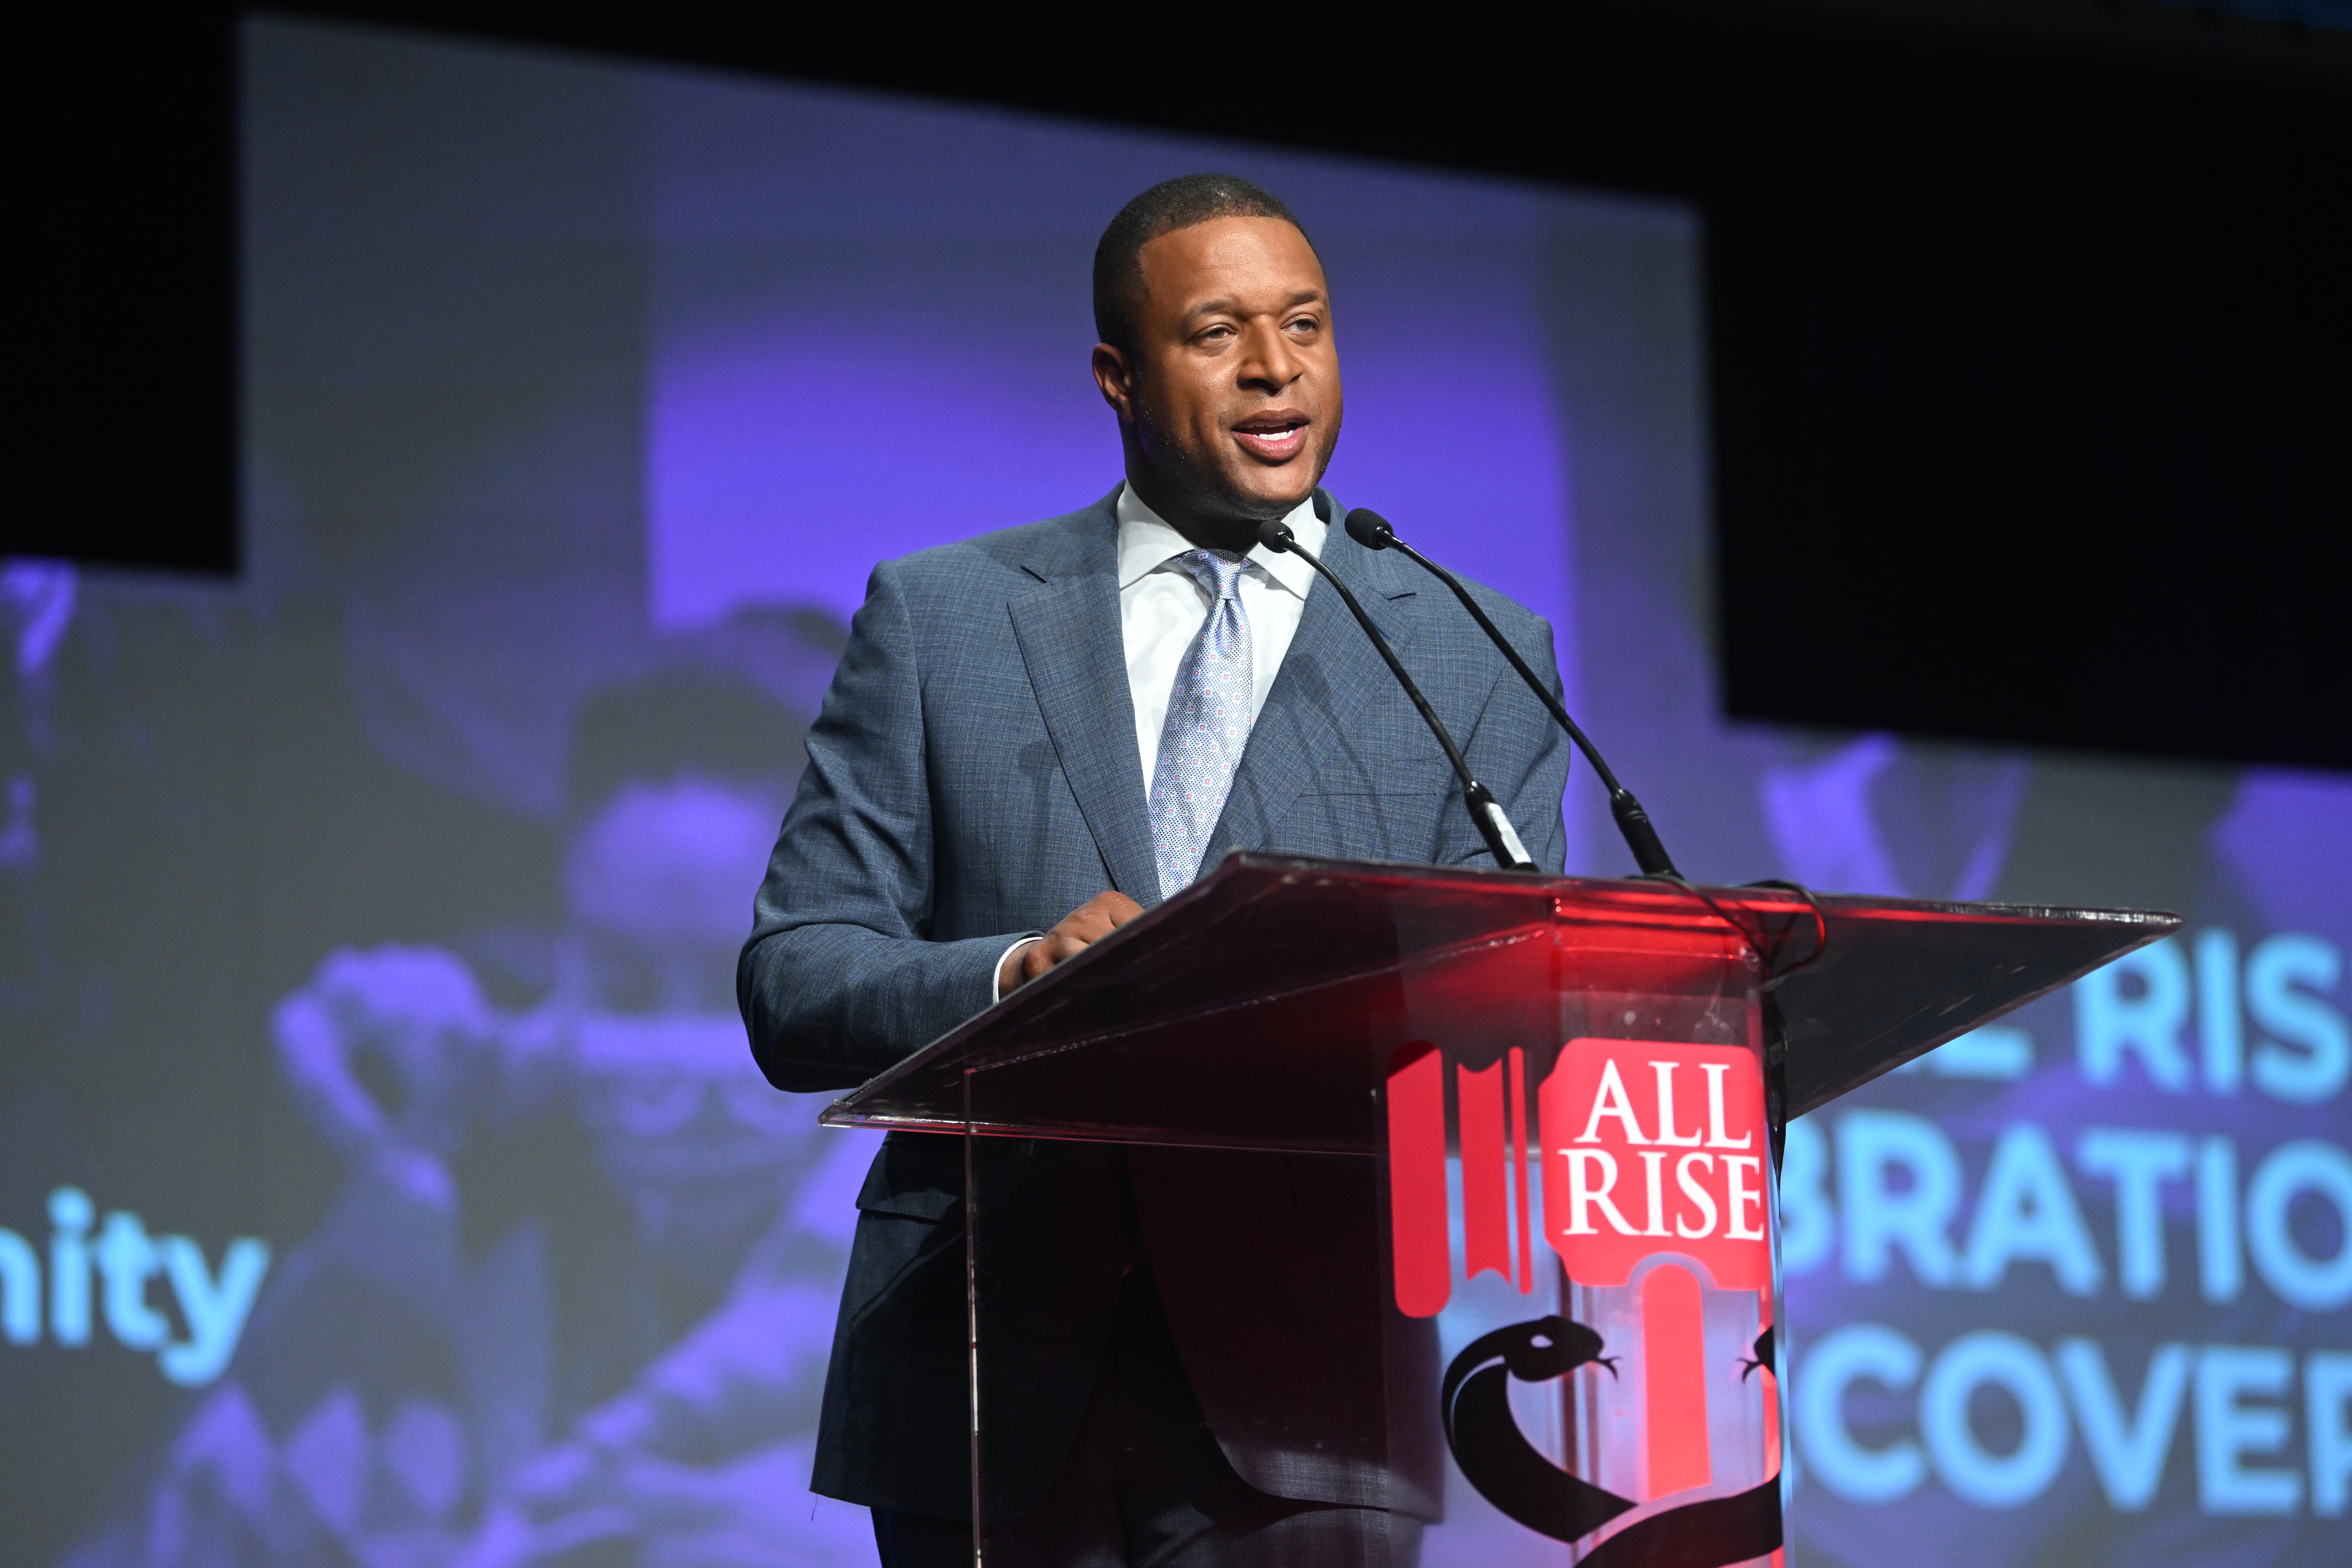 NBC "TODAY Show" anchor Craig Melvin describes his family's journey to reconciliation after his father's recovery from alcohol use disorder.